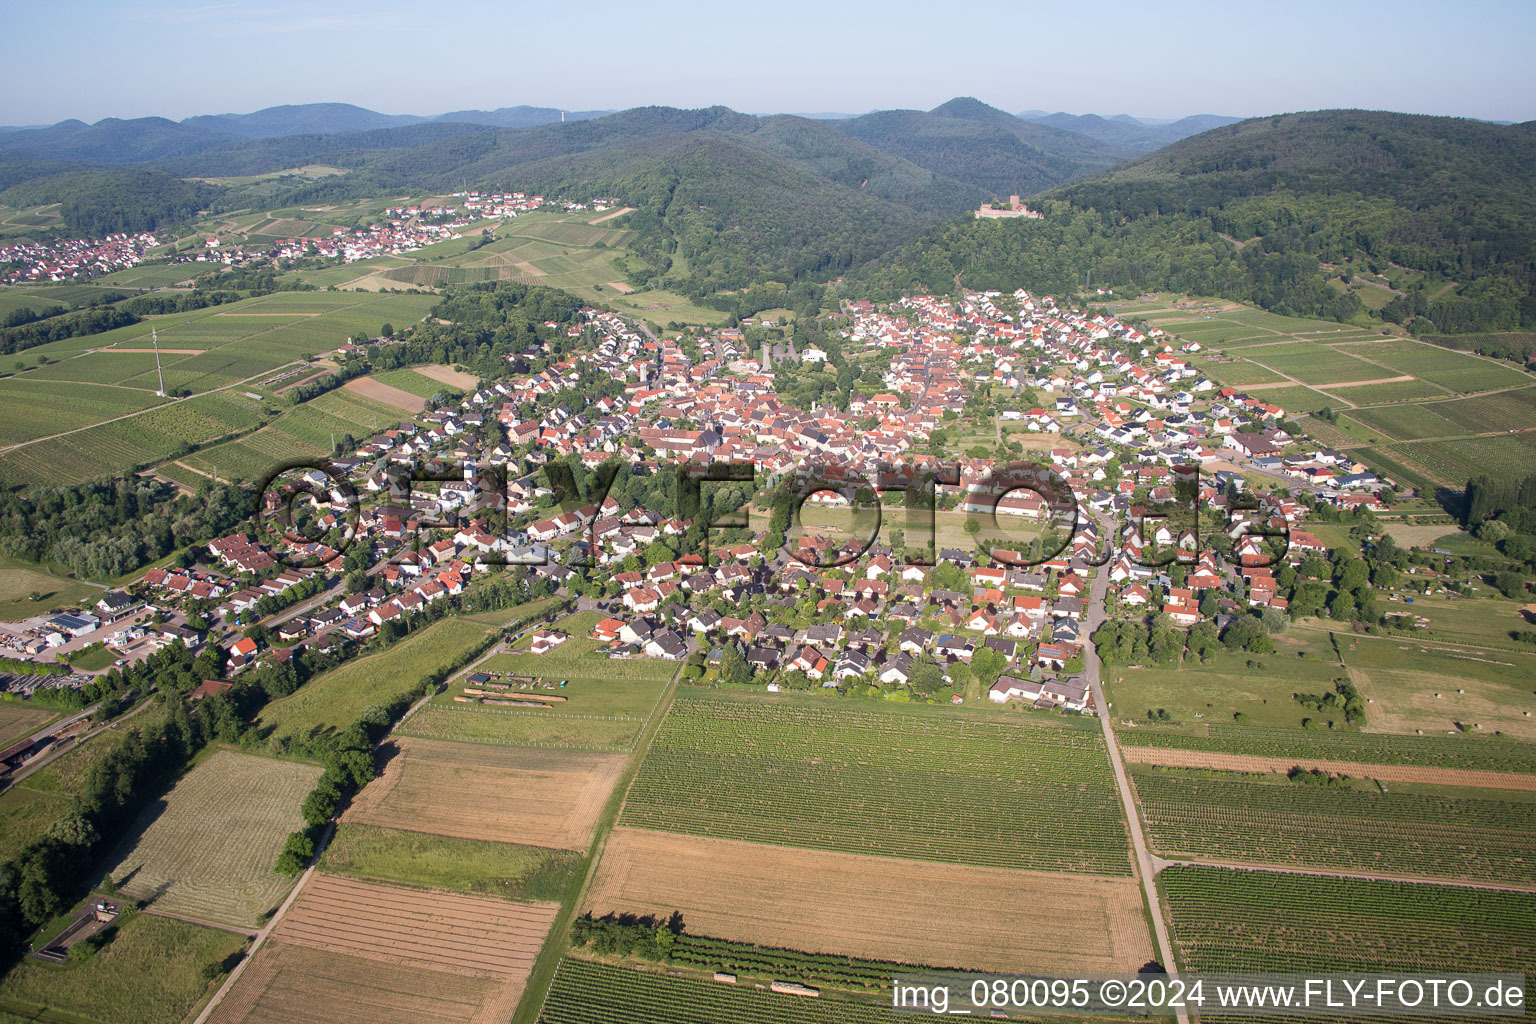 Klingenmünster in the state Rhineland-Palatinate, Germany viewn from the air